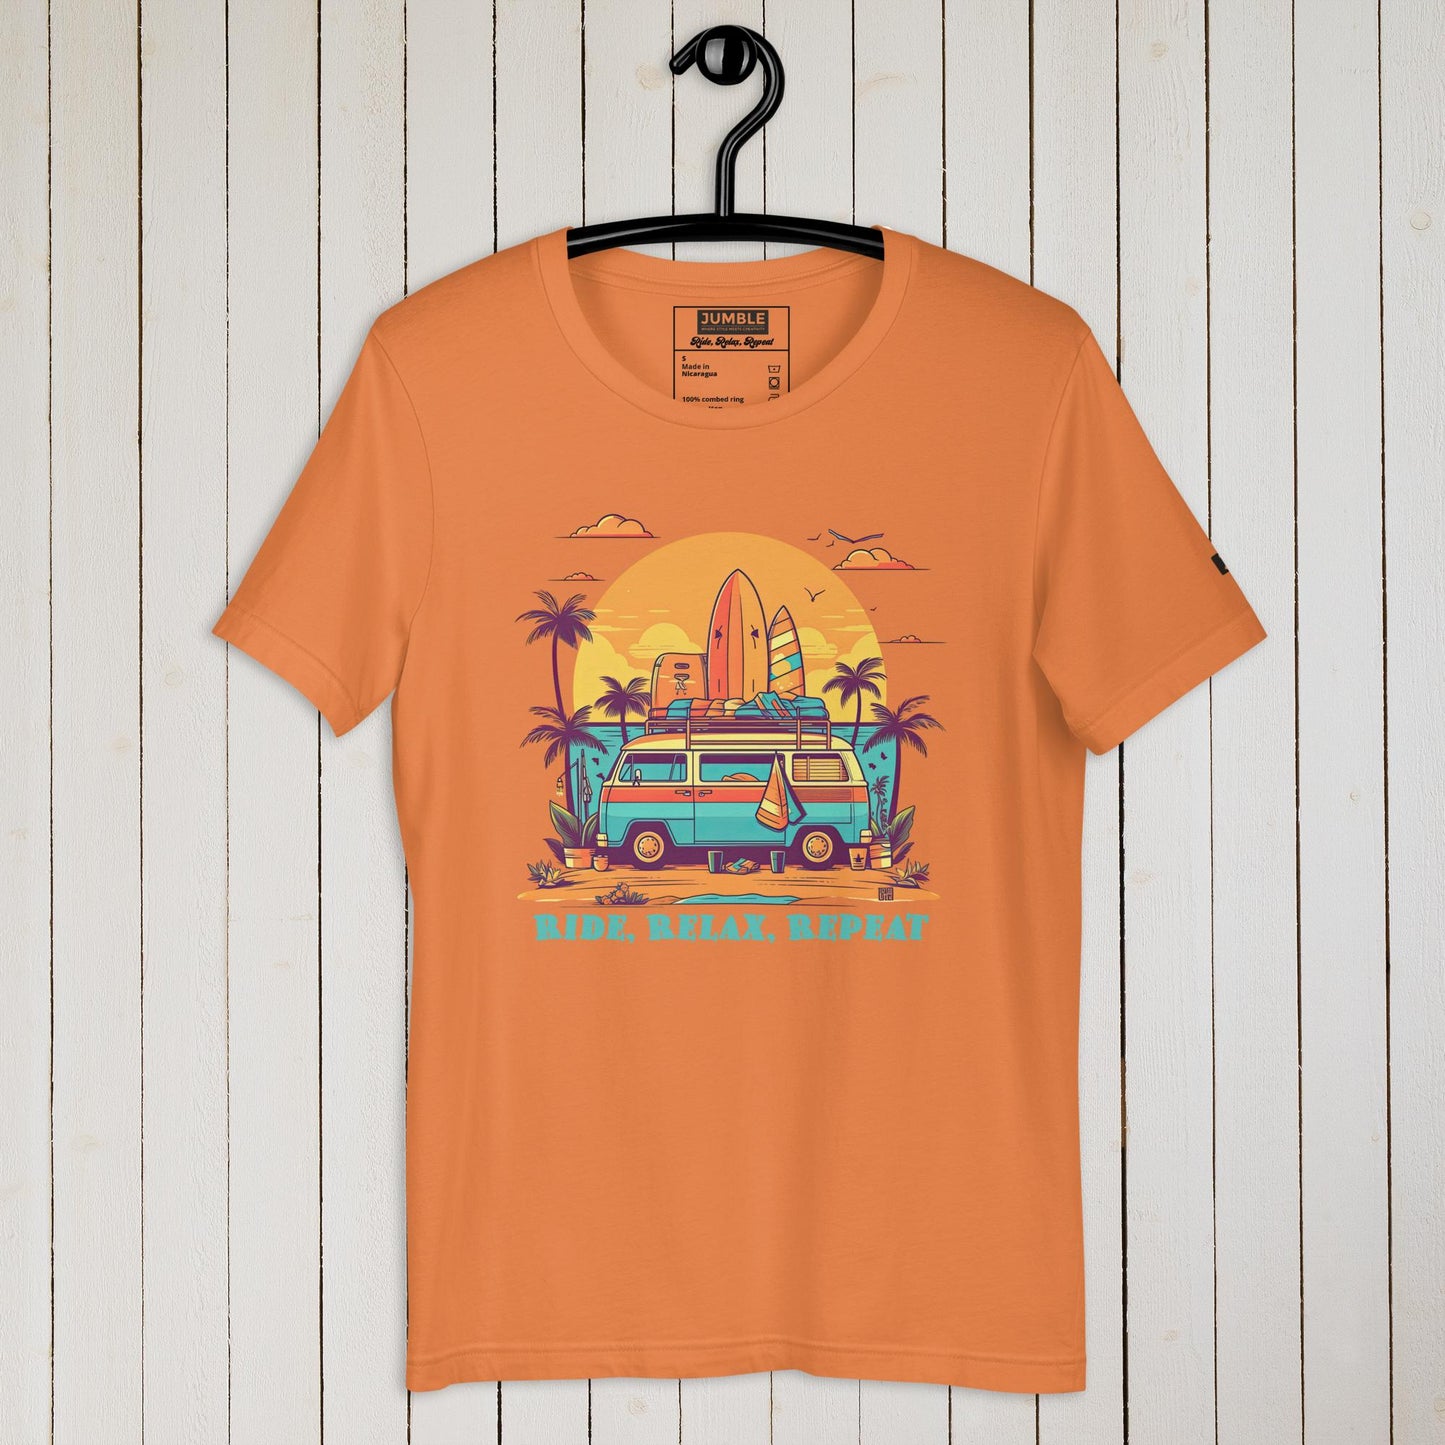 Unisex "Ride, Relax, Repeat" T-Shirt in Burnt Orange - Hanging on a hanger